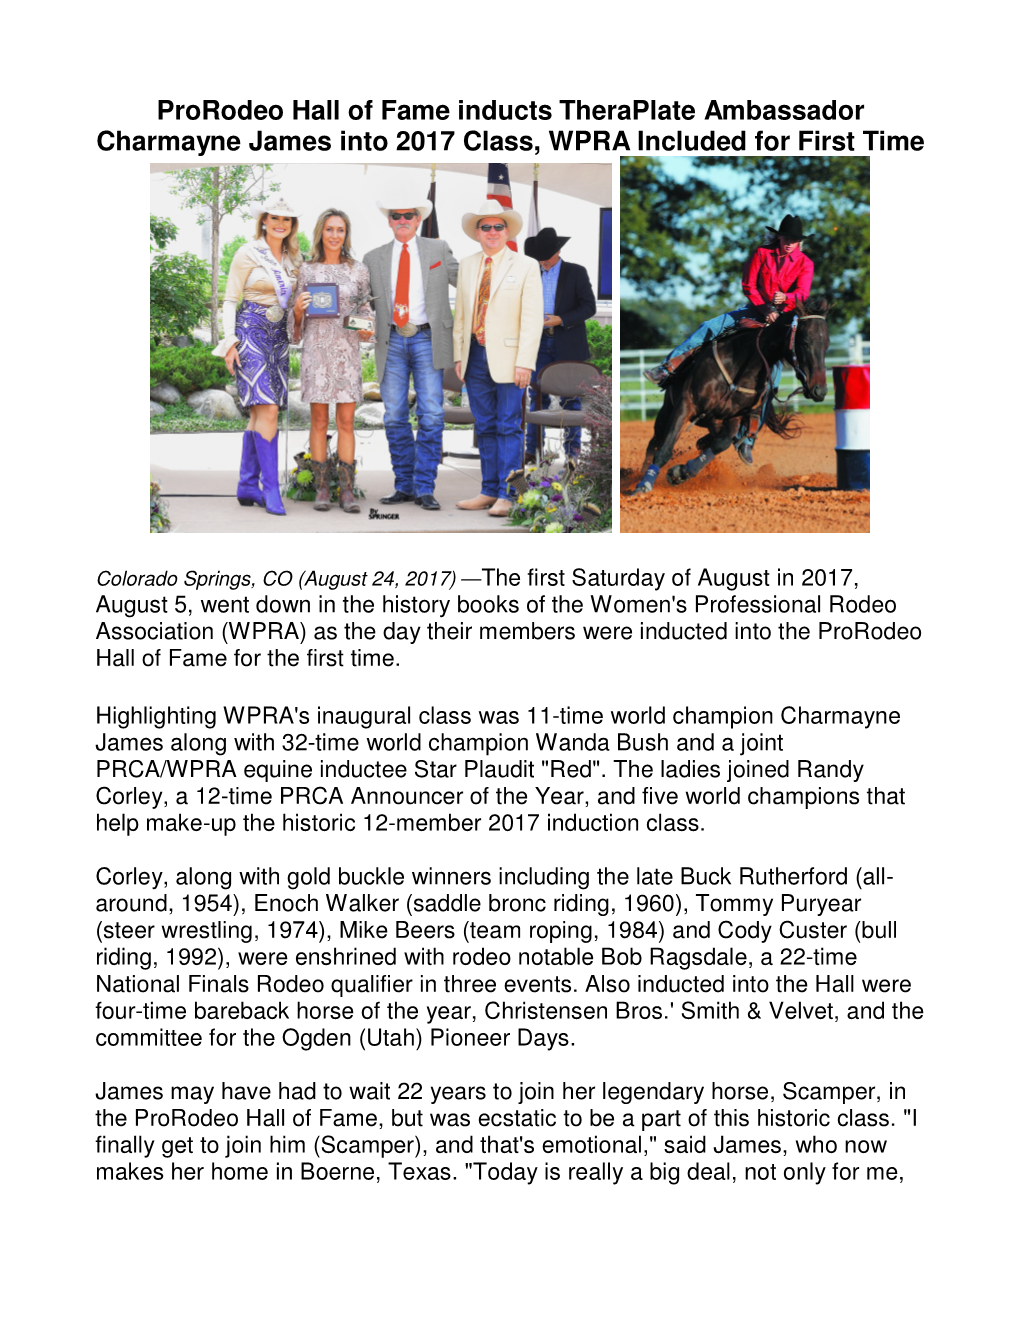 Prorodeo Hall of Fame Inducts Theraplate Ambassador Charmayne James Into 2017 Class, WPRA Included for First Time